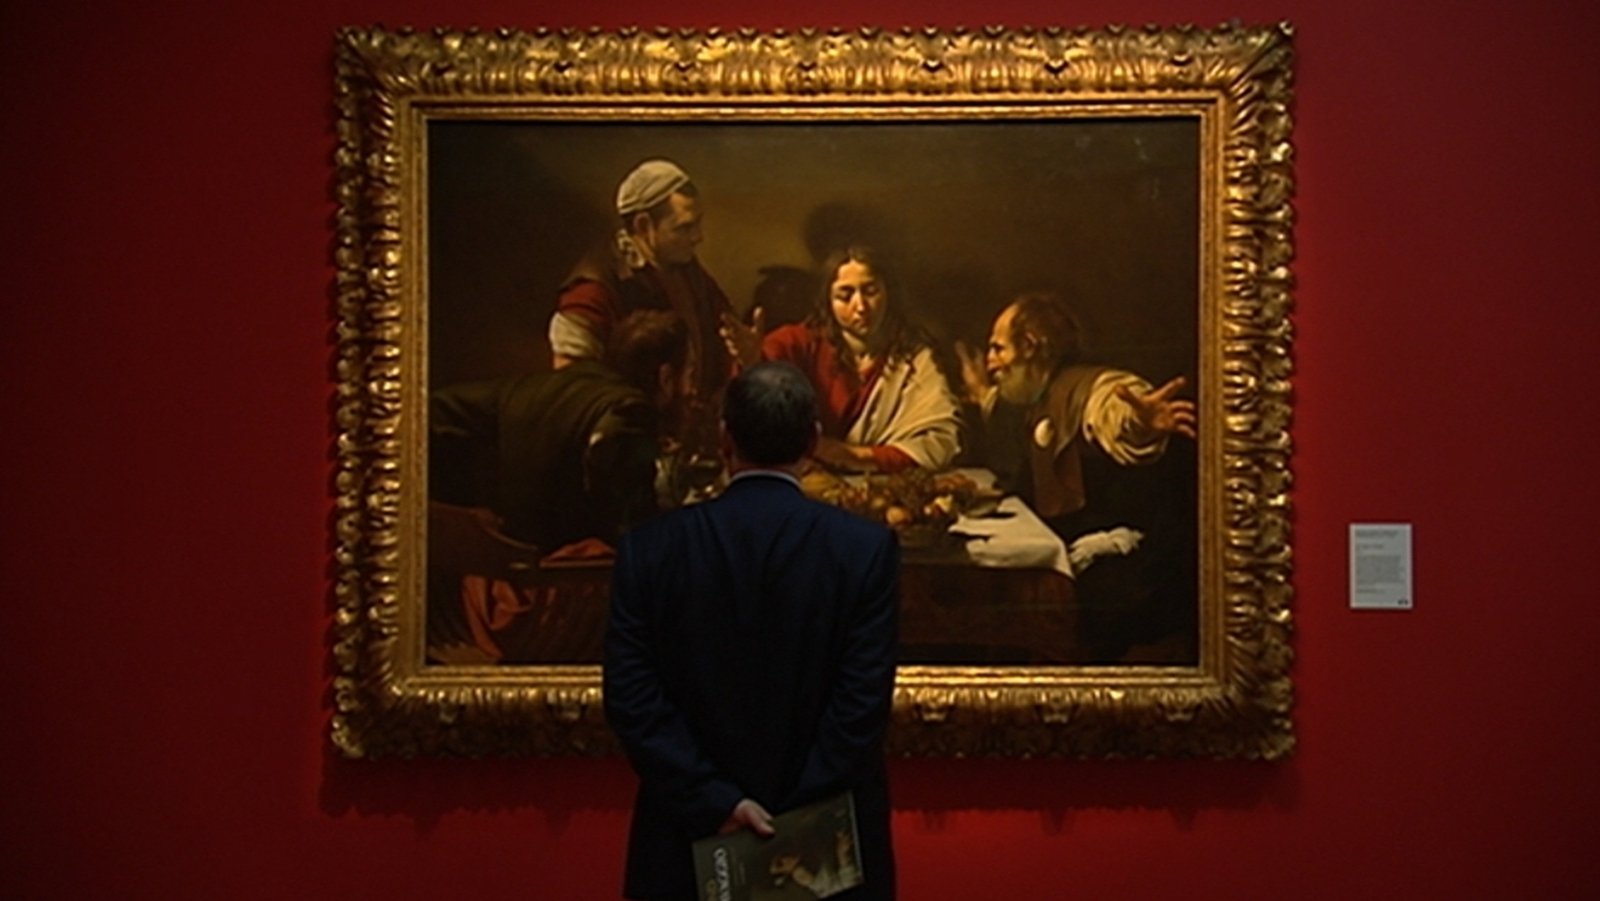 'Beyond Caravaggio' exhibition to open at National Gallery